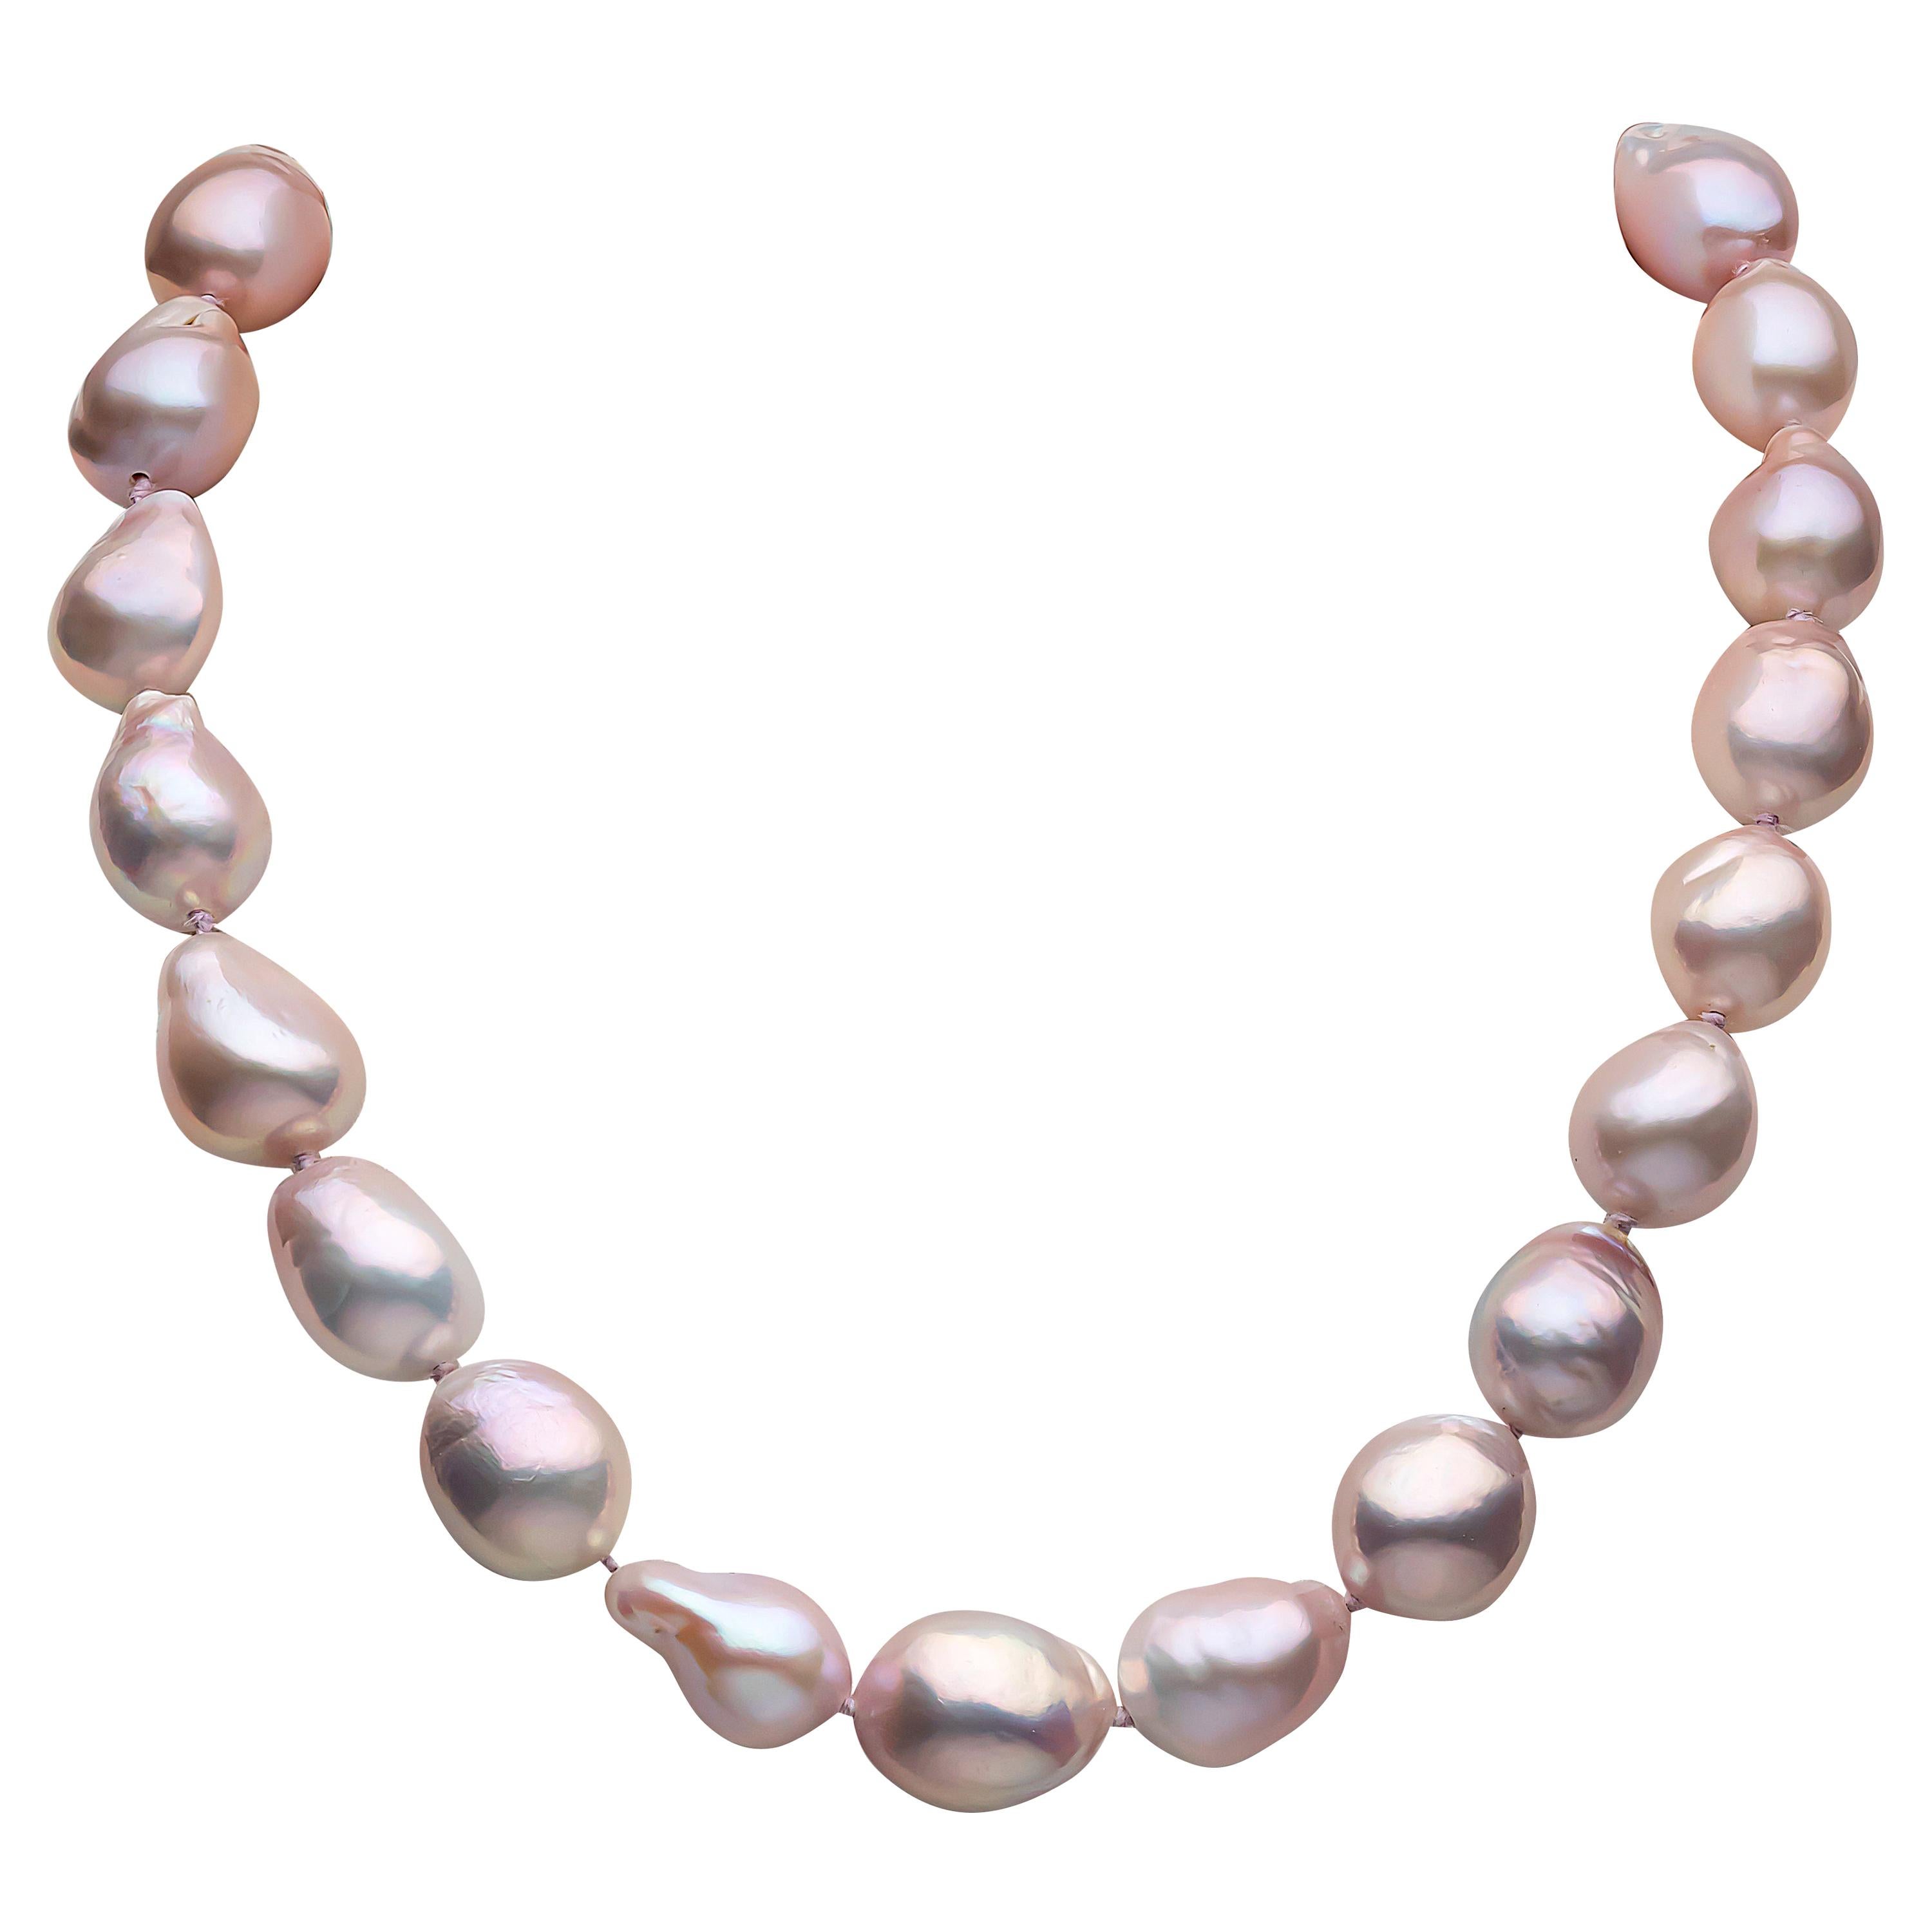 Yoko London Baroque Natural Colour Pink Freshwater Pearl Necklace in 18K Gold